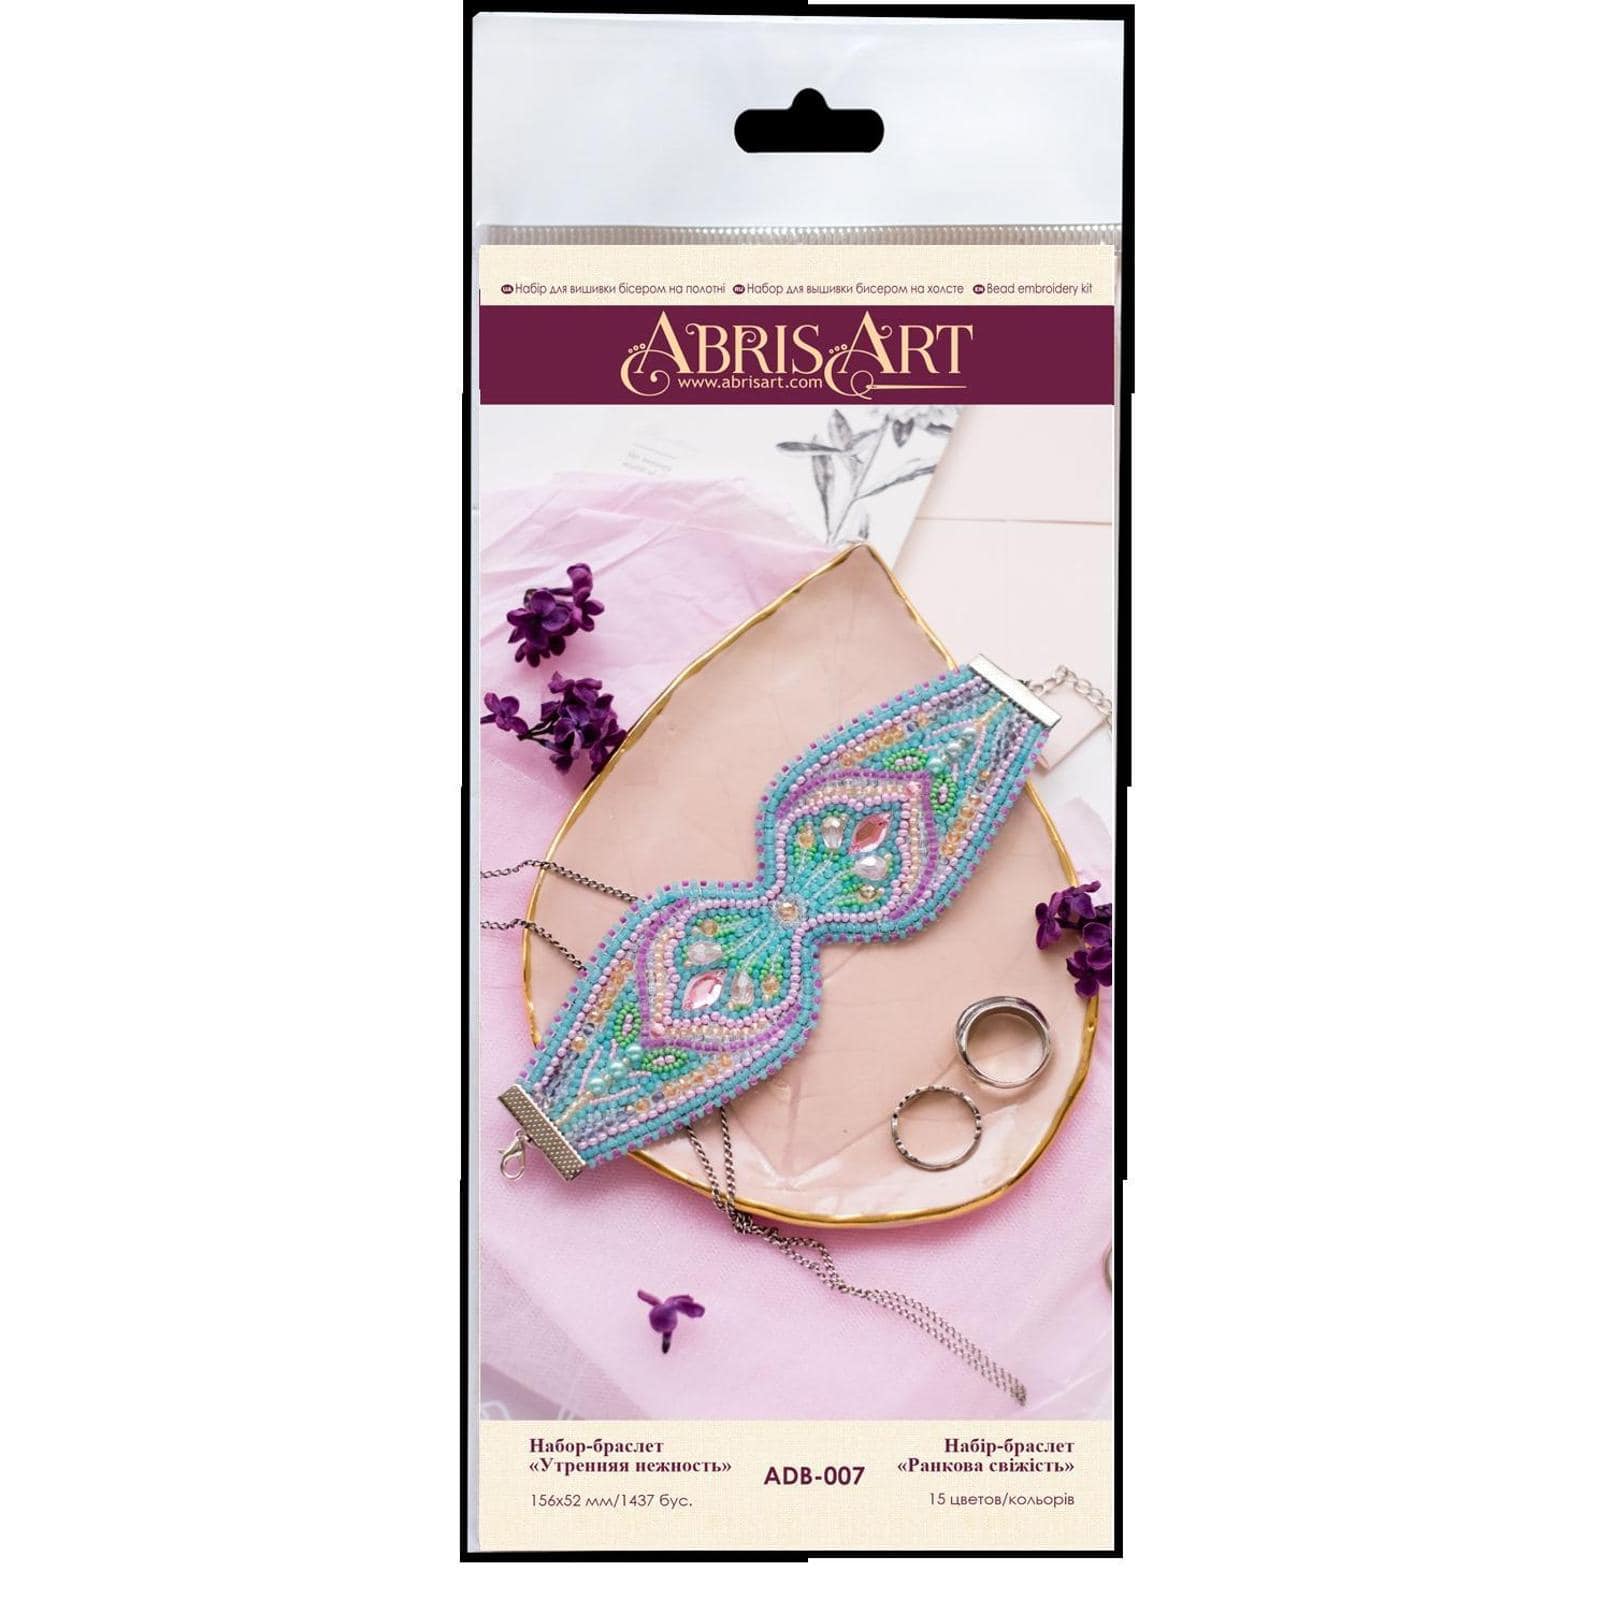 Abris Art Decoration Morning Tenderness Bead Embroidery Kit